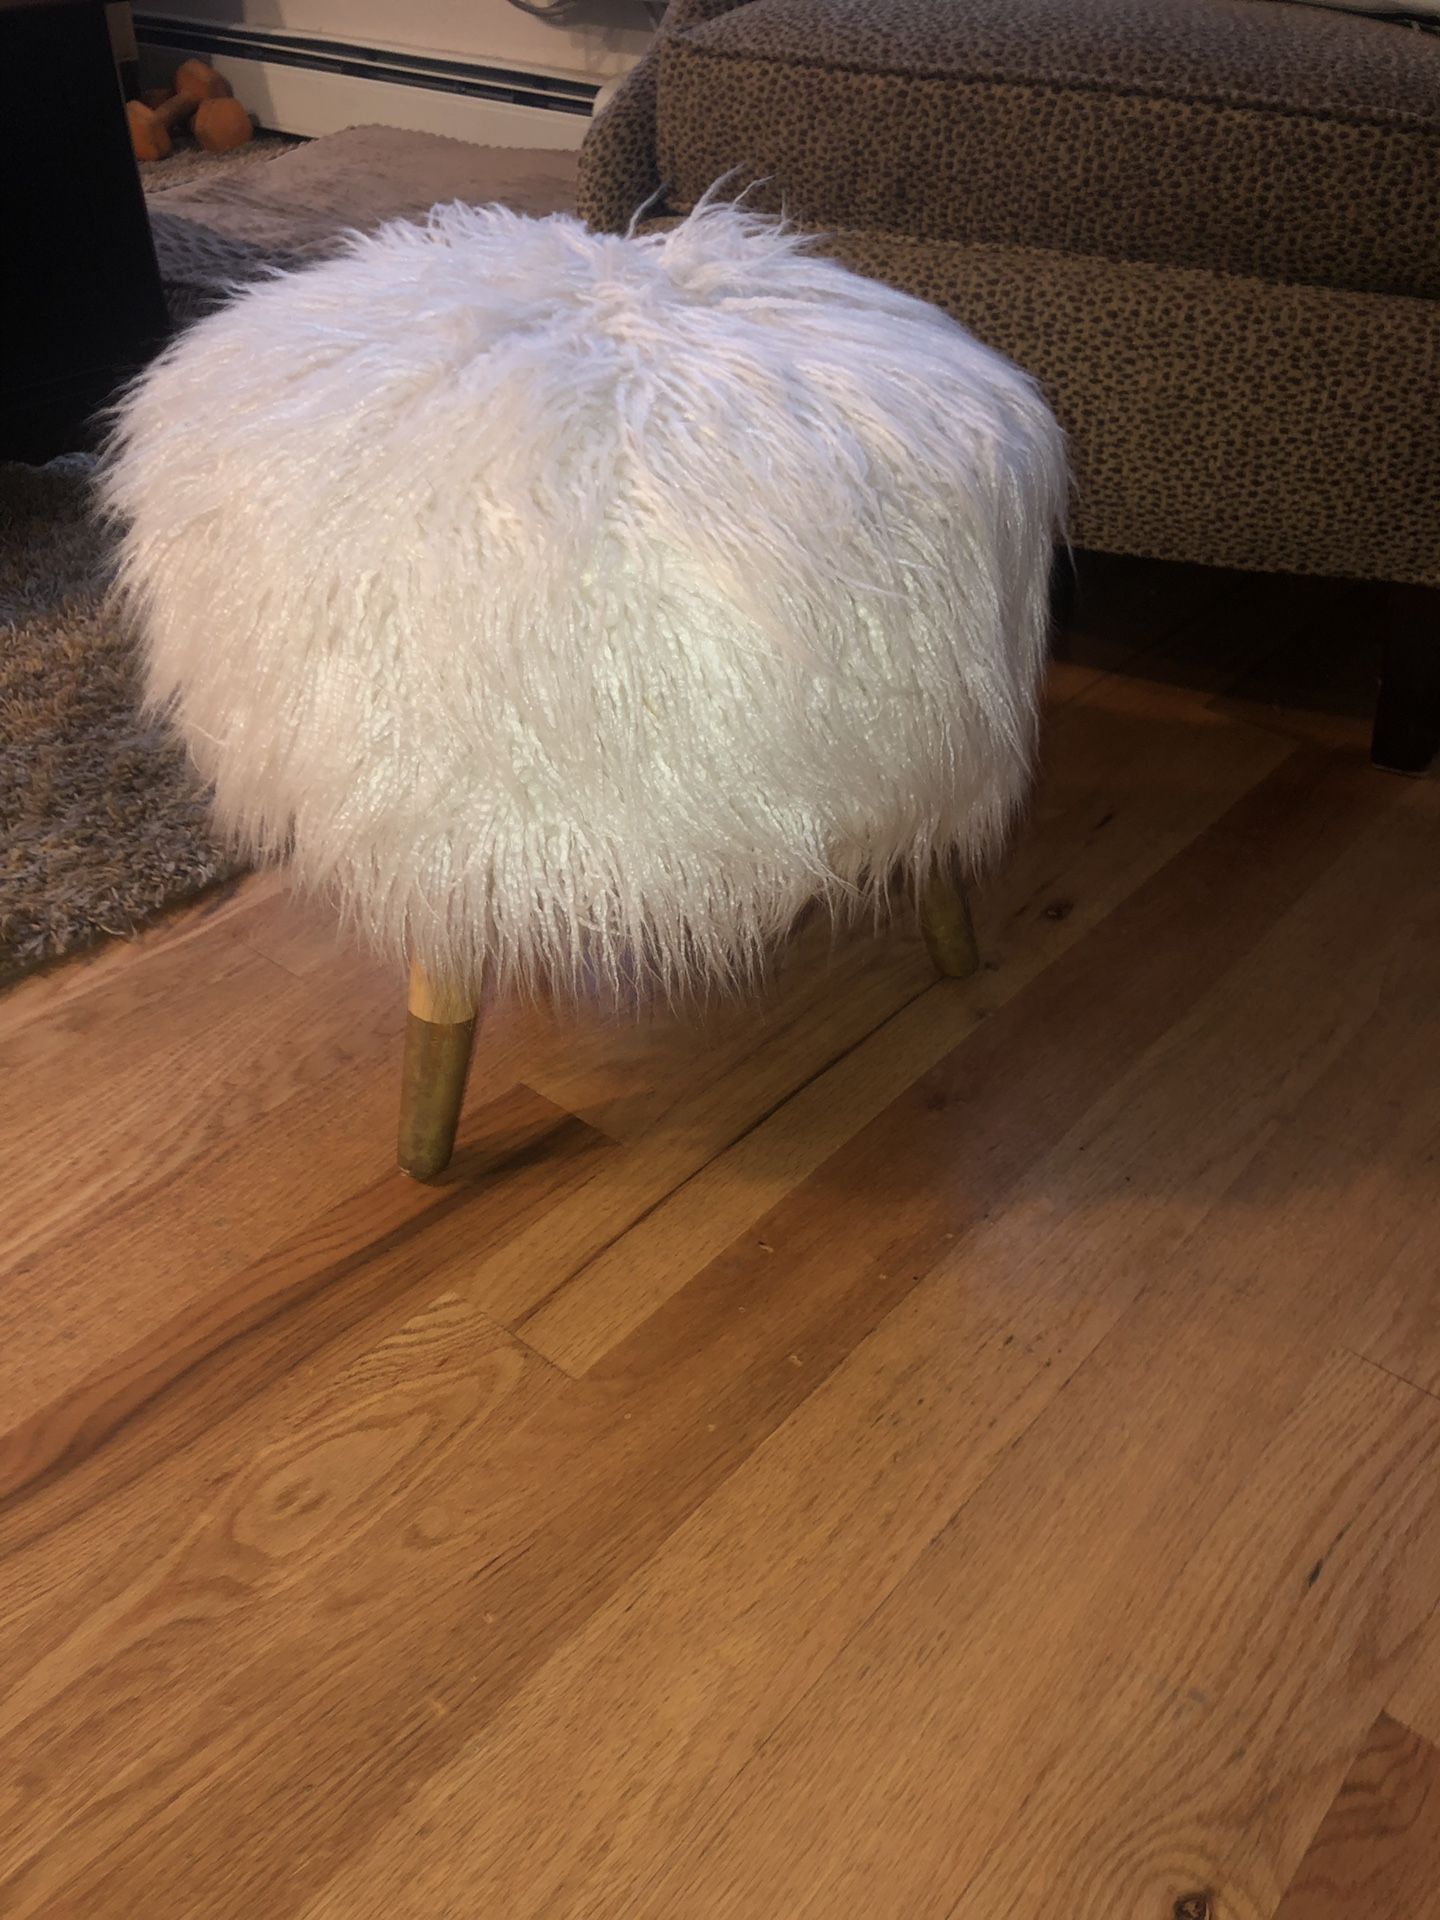 Decorative fluffy footrest!